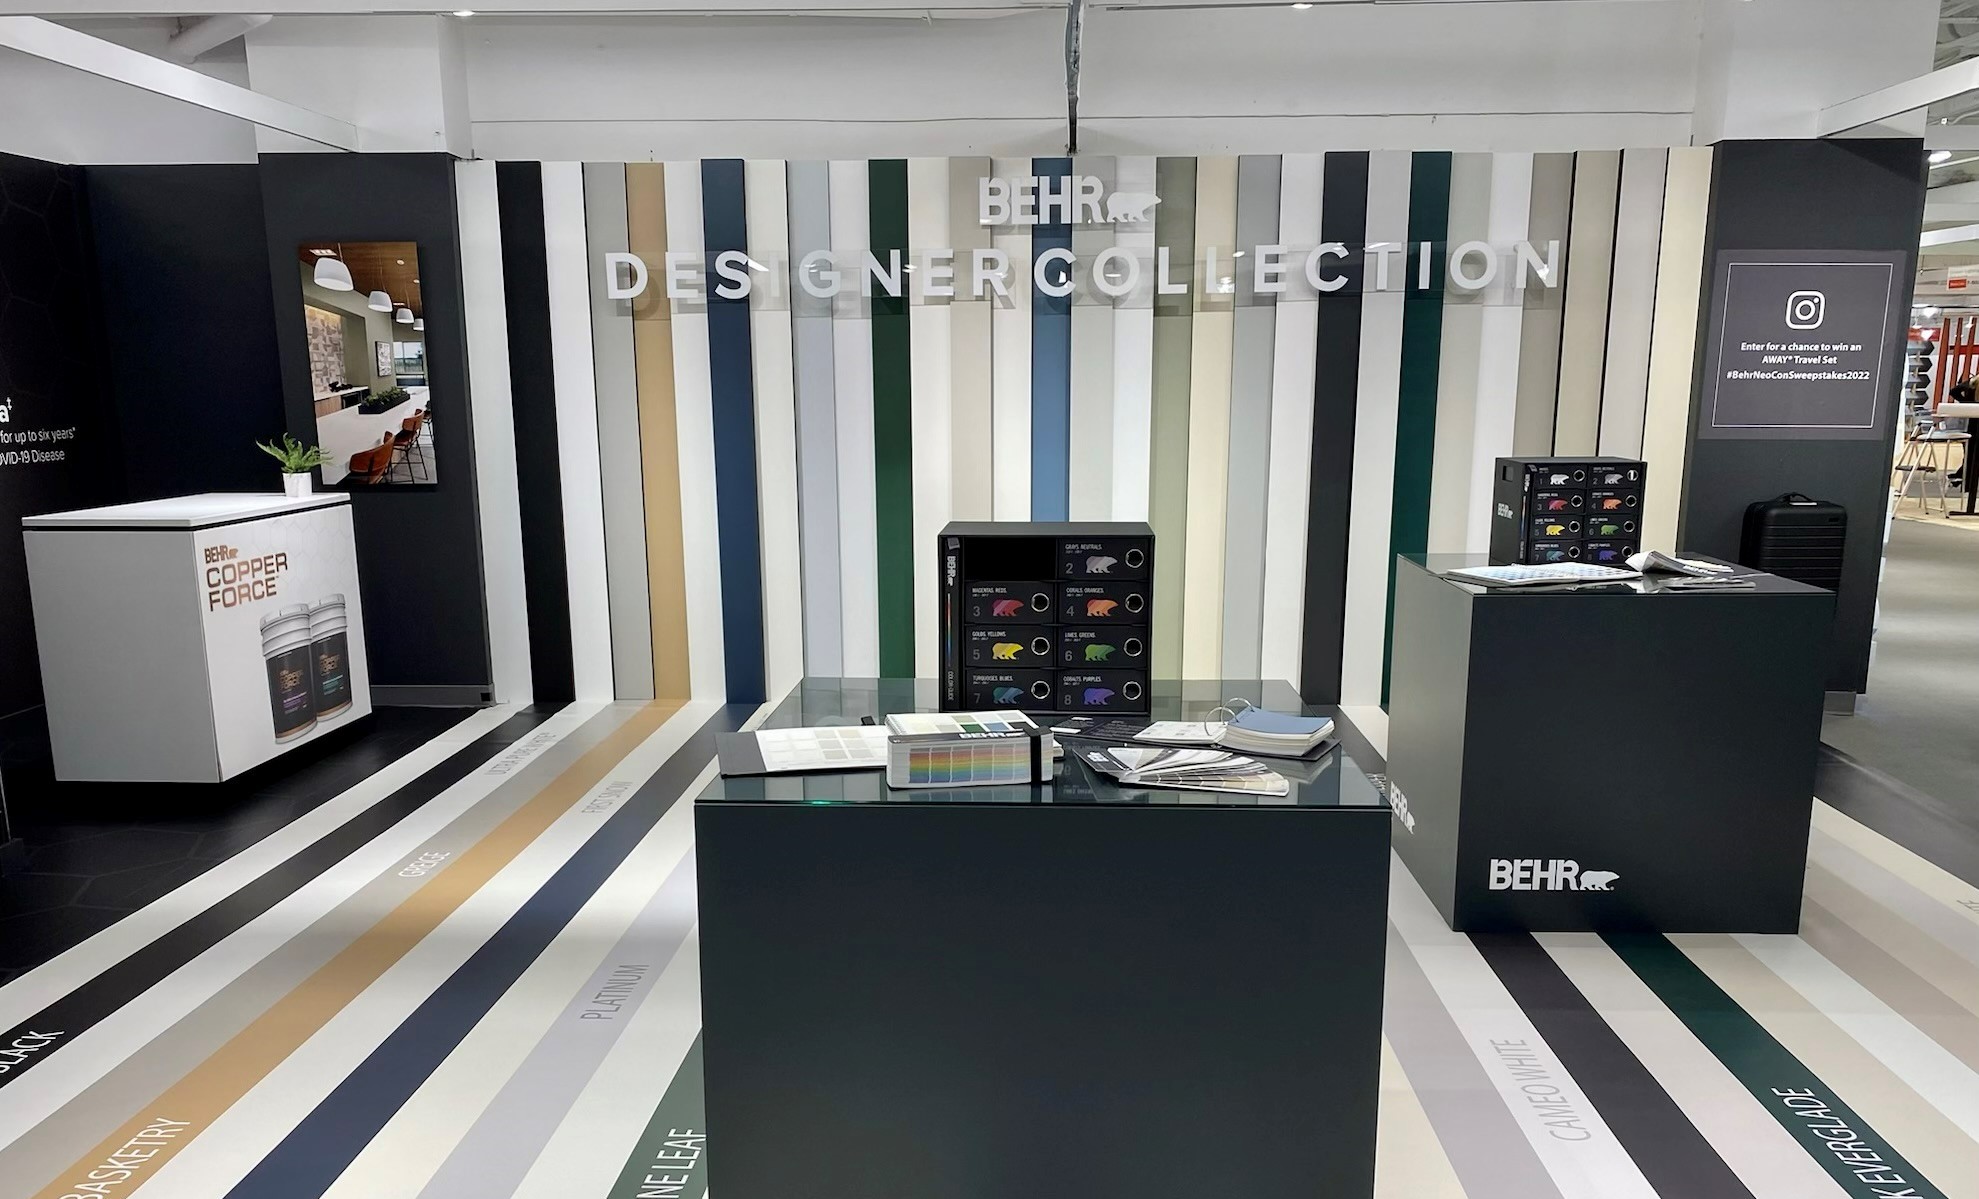 Behr Designer Collection showroom featuring the Color Guide and BEHR® COPPER FORCE™ Interior Paint.